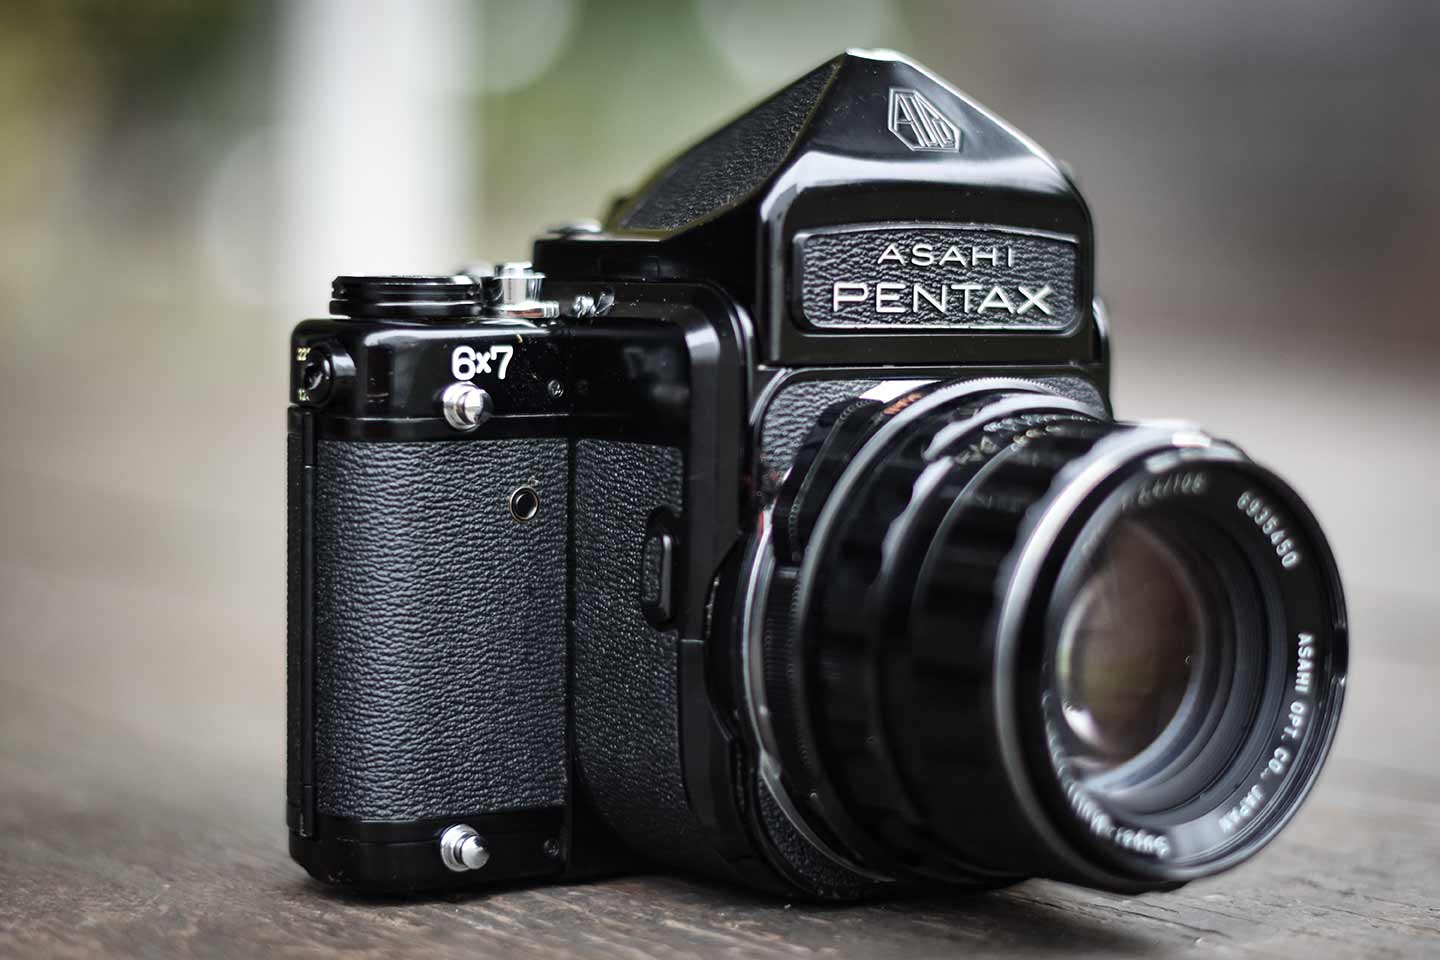 Large black camera with a lens attached, Asahi Pentax embossed on the front, 6 x 7 inscribed on right side, and knobs and silver accessory mounts